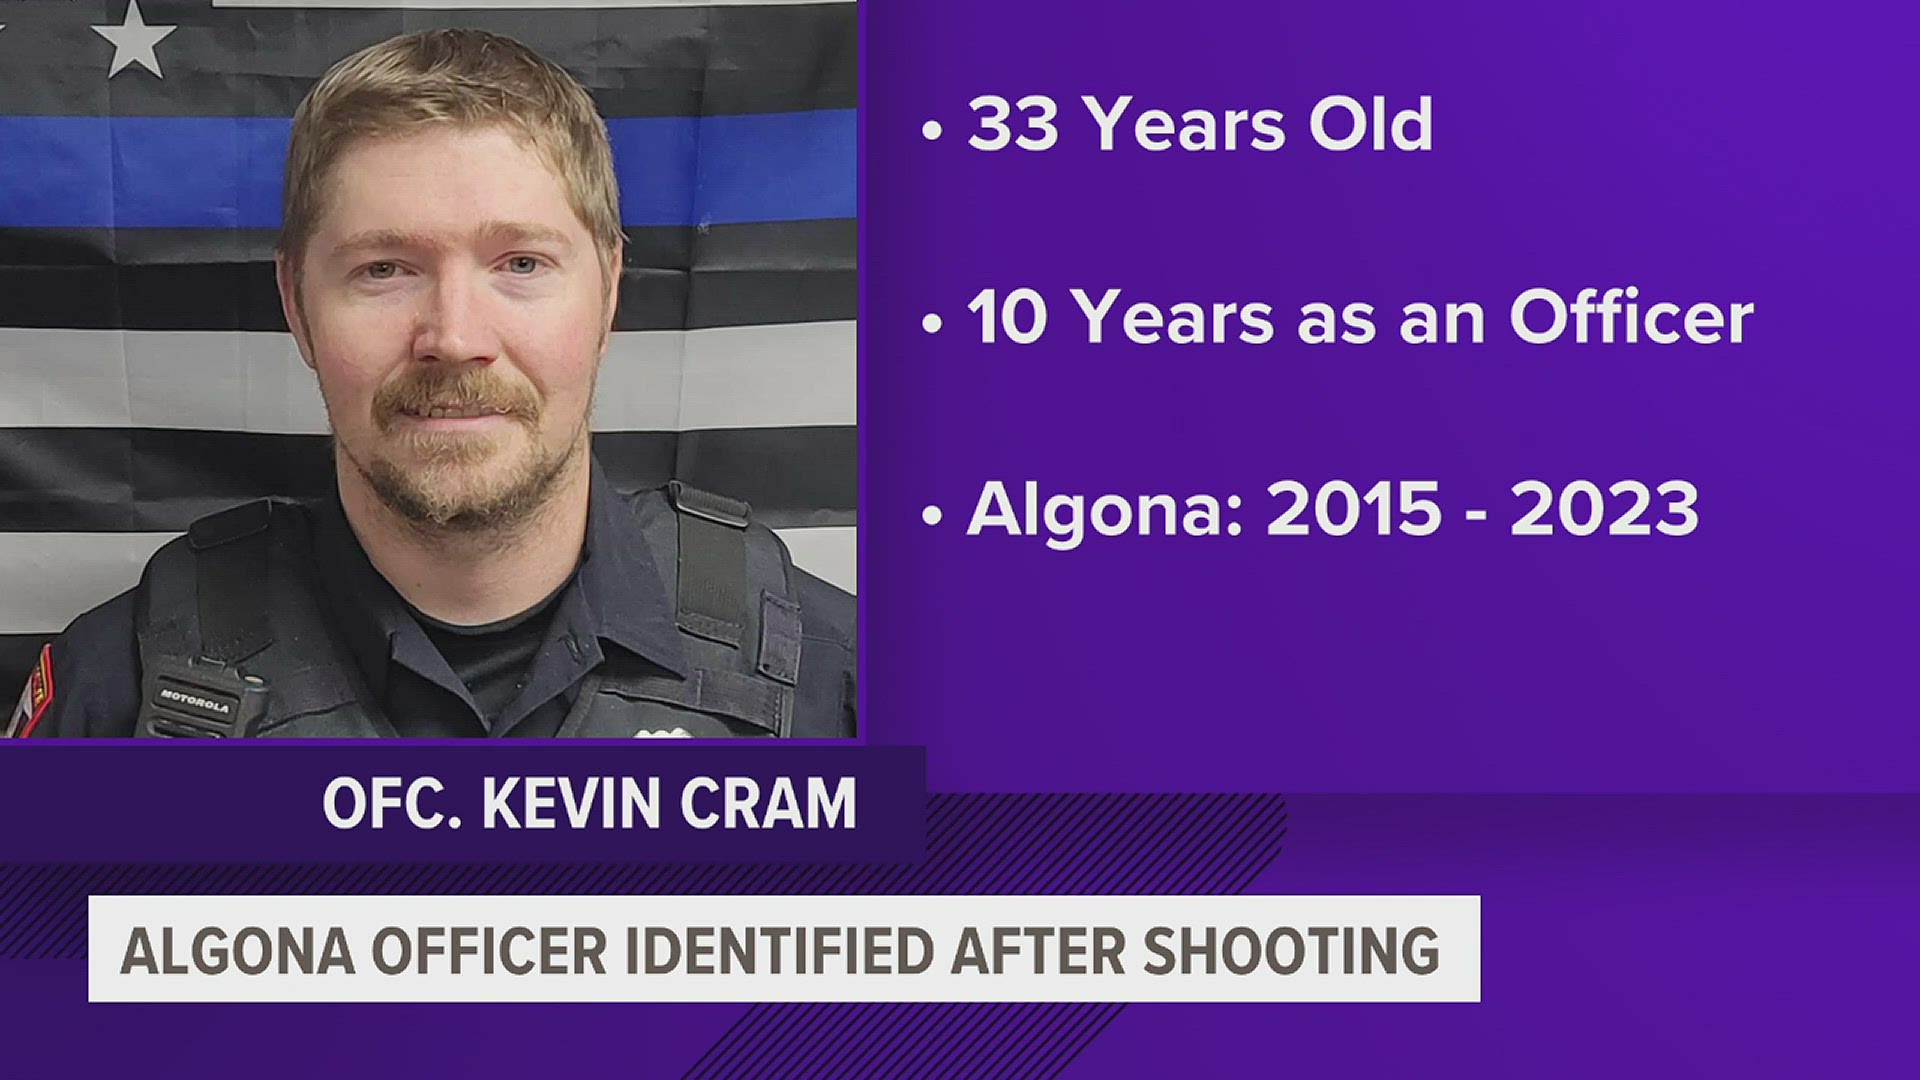 Ofc. Kevin Cram was 33 years old. He had worked for the Nora Springs Police Department and the Algona Police Department.